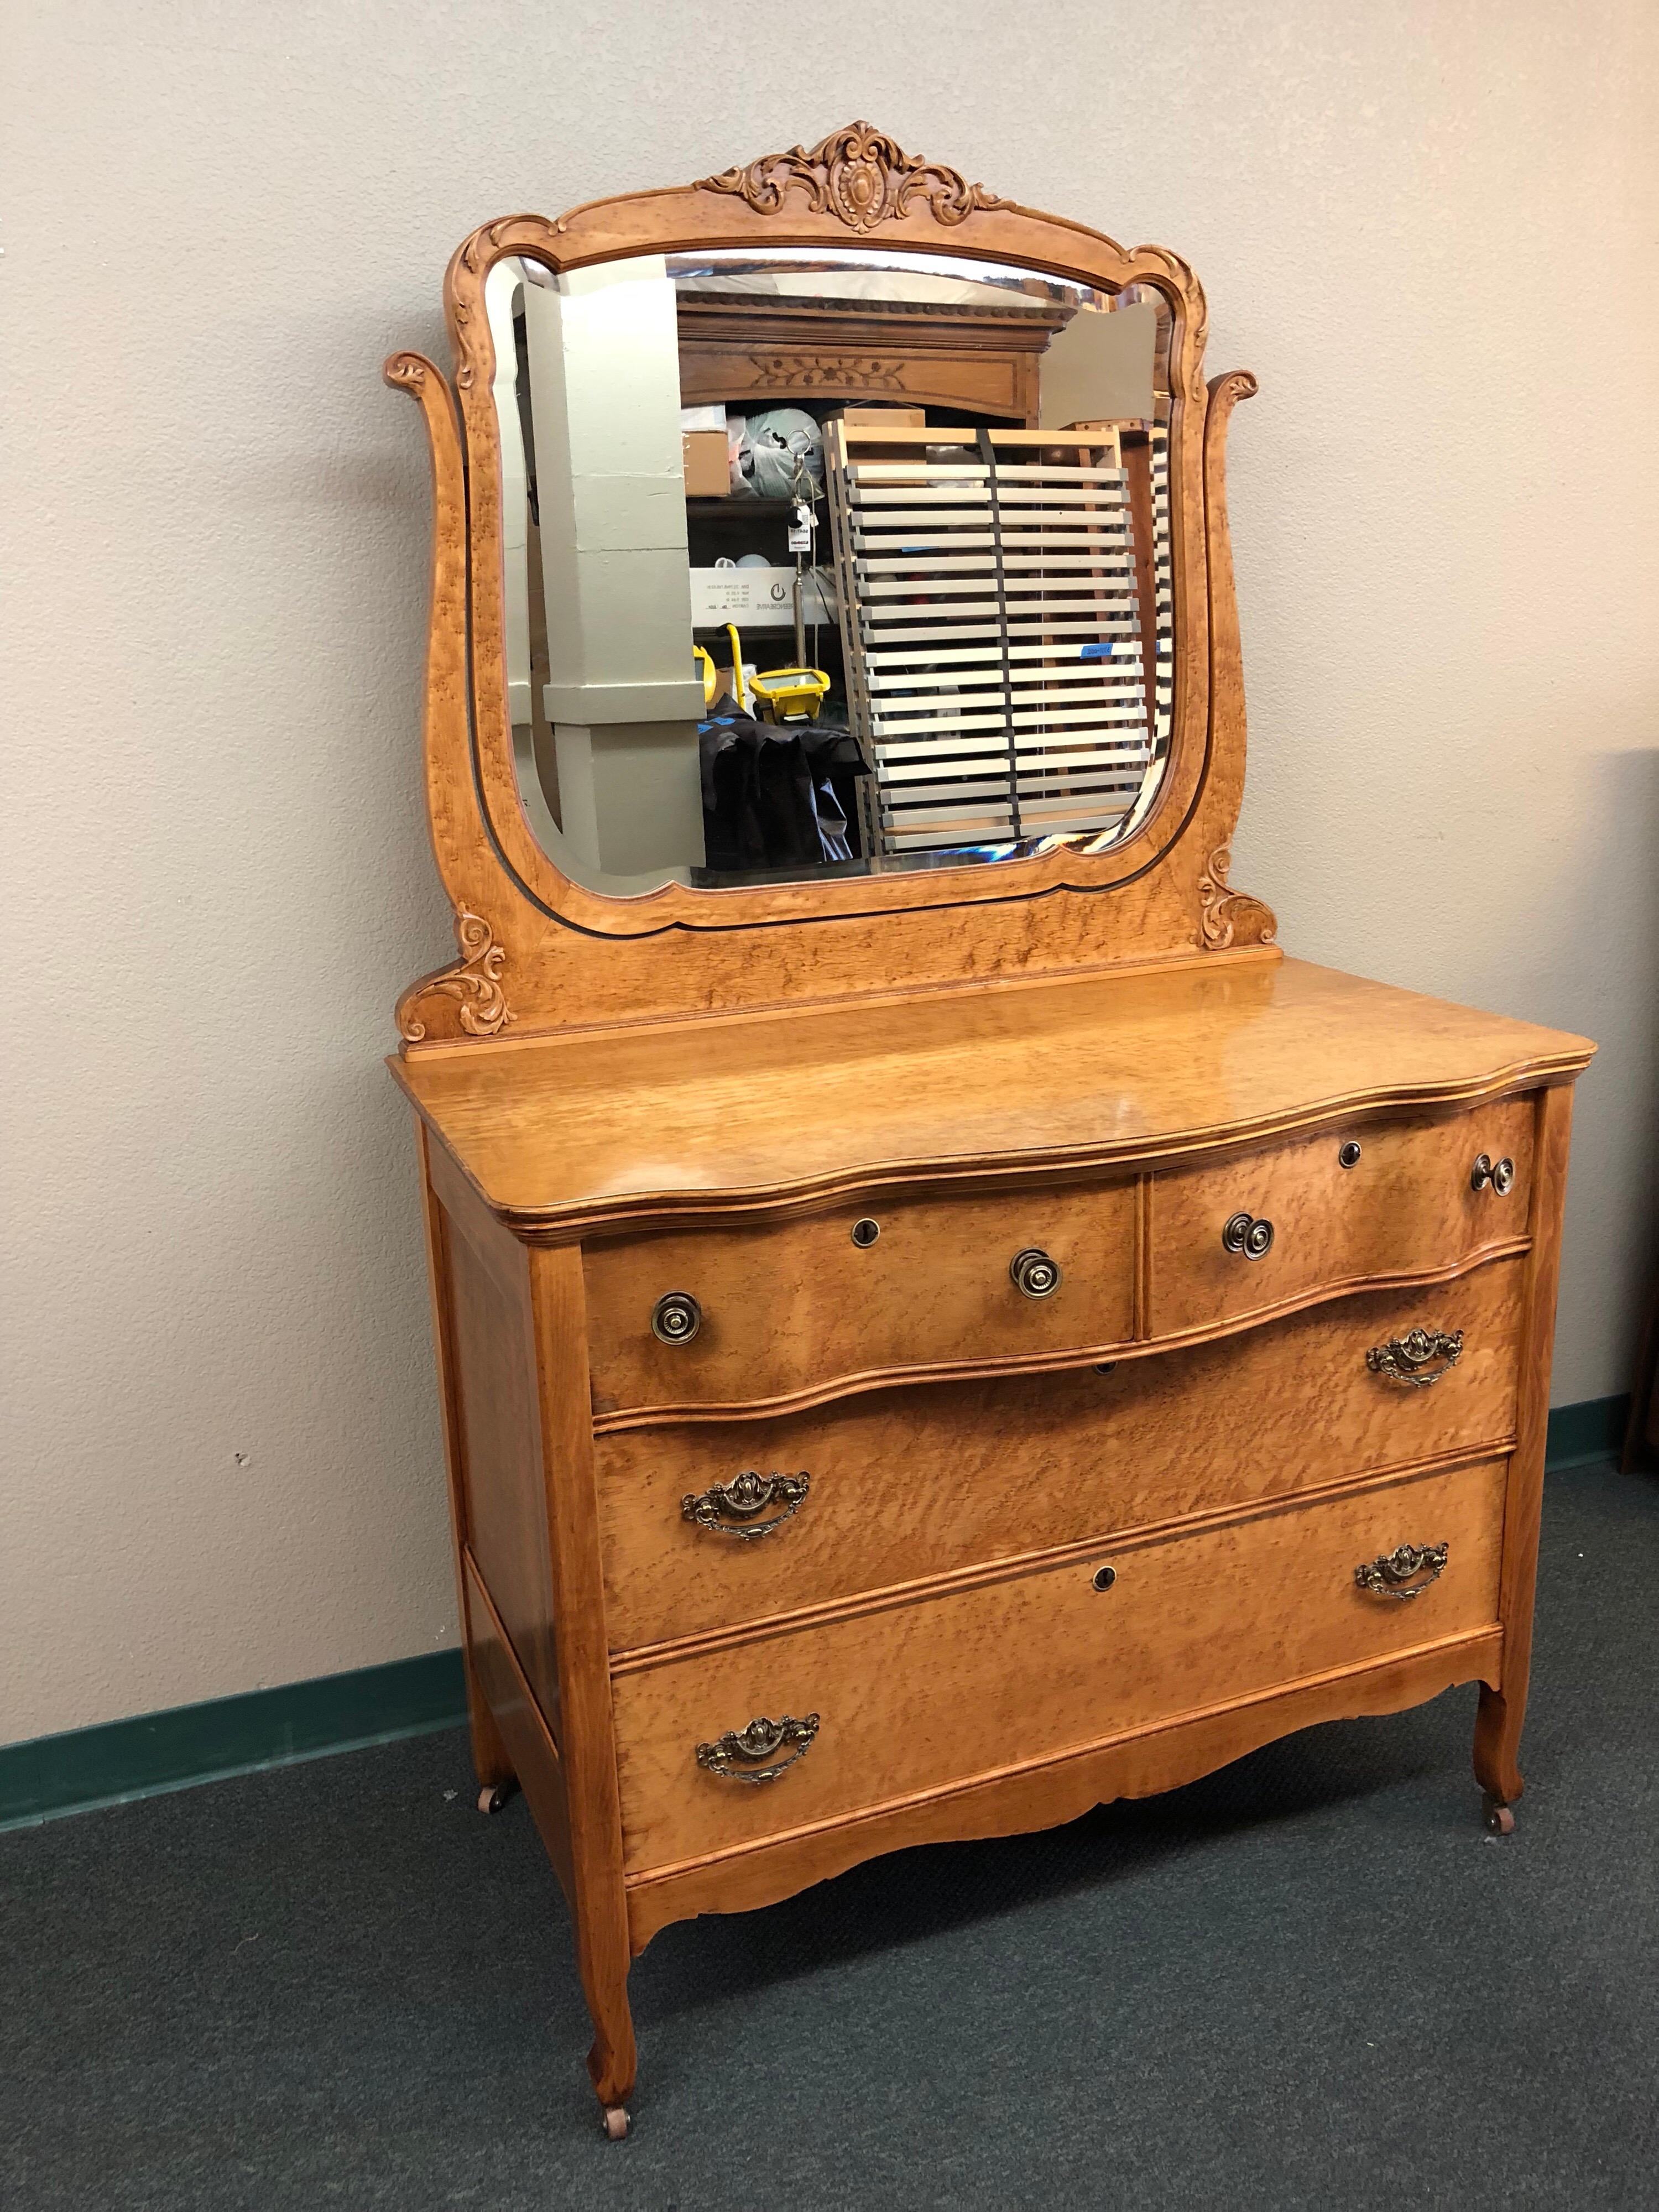 A vintage dresser with mirror. The curly maple woodgrain is only the first of many vintage delights that include curved front drawers, carved flourishes and antiqued brass fittings.
 